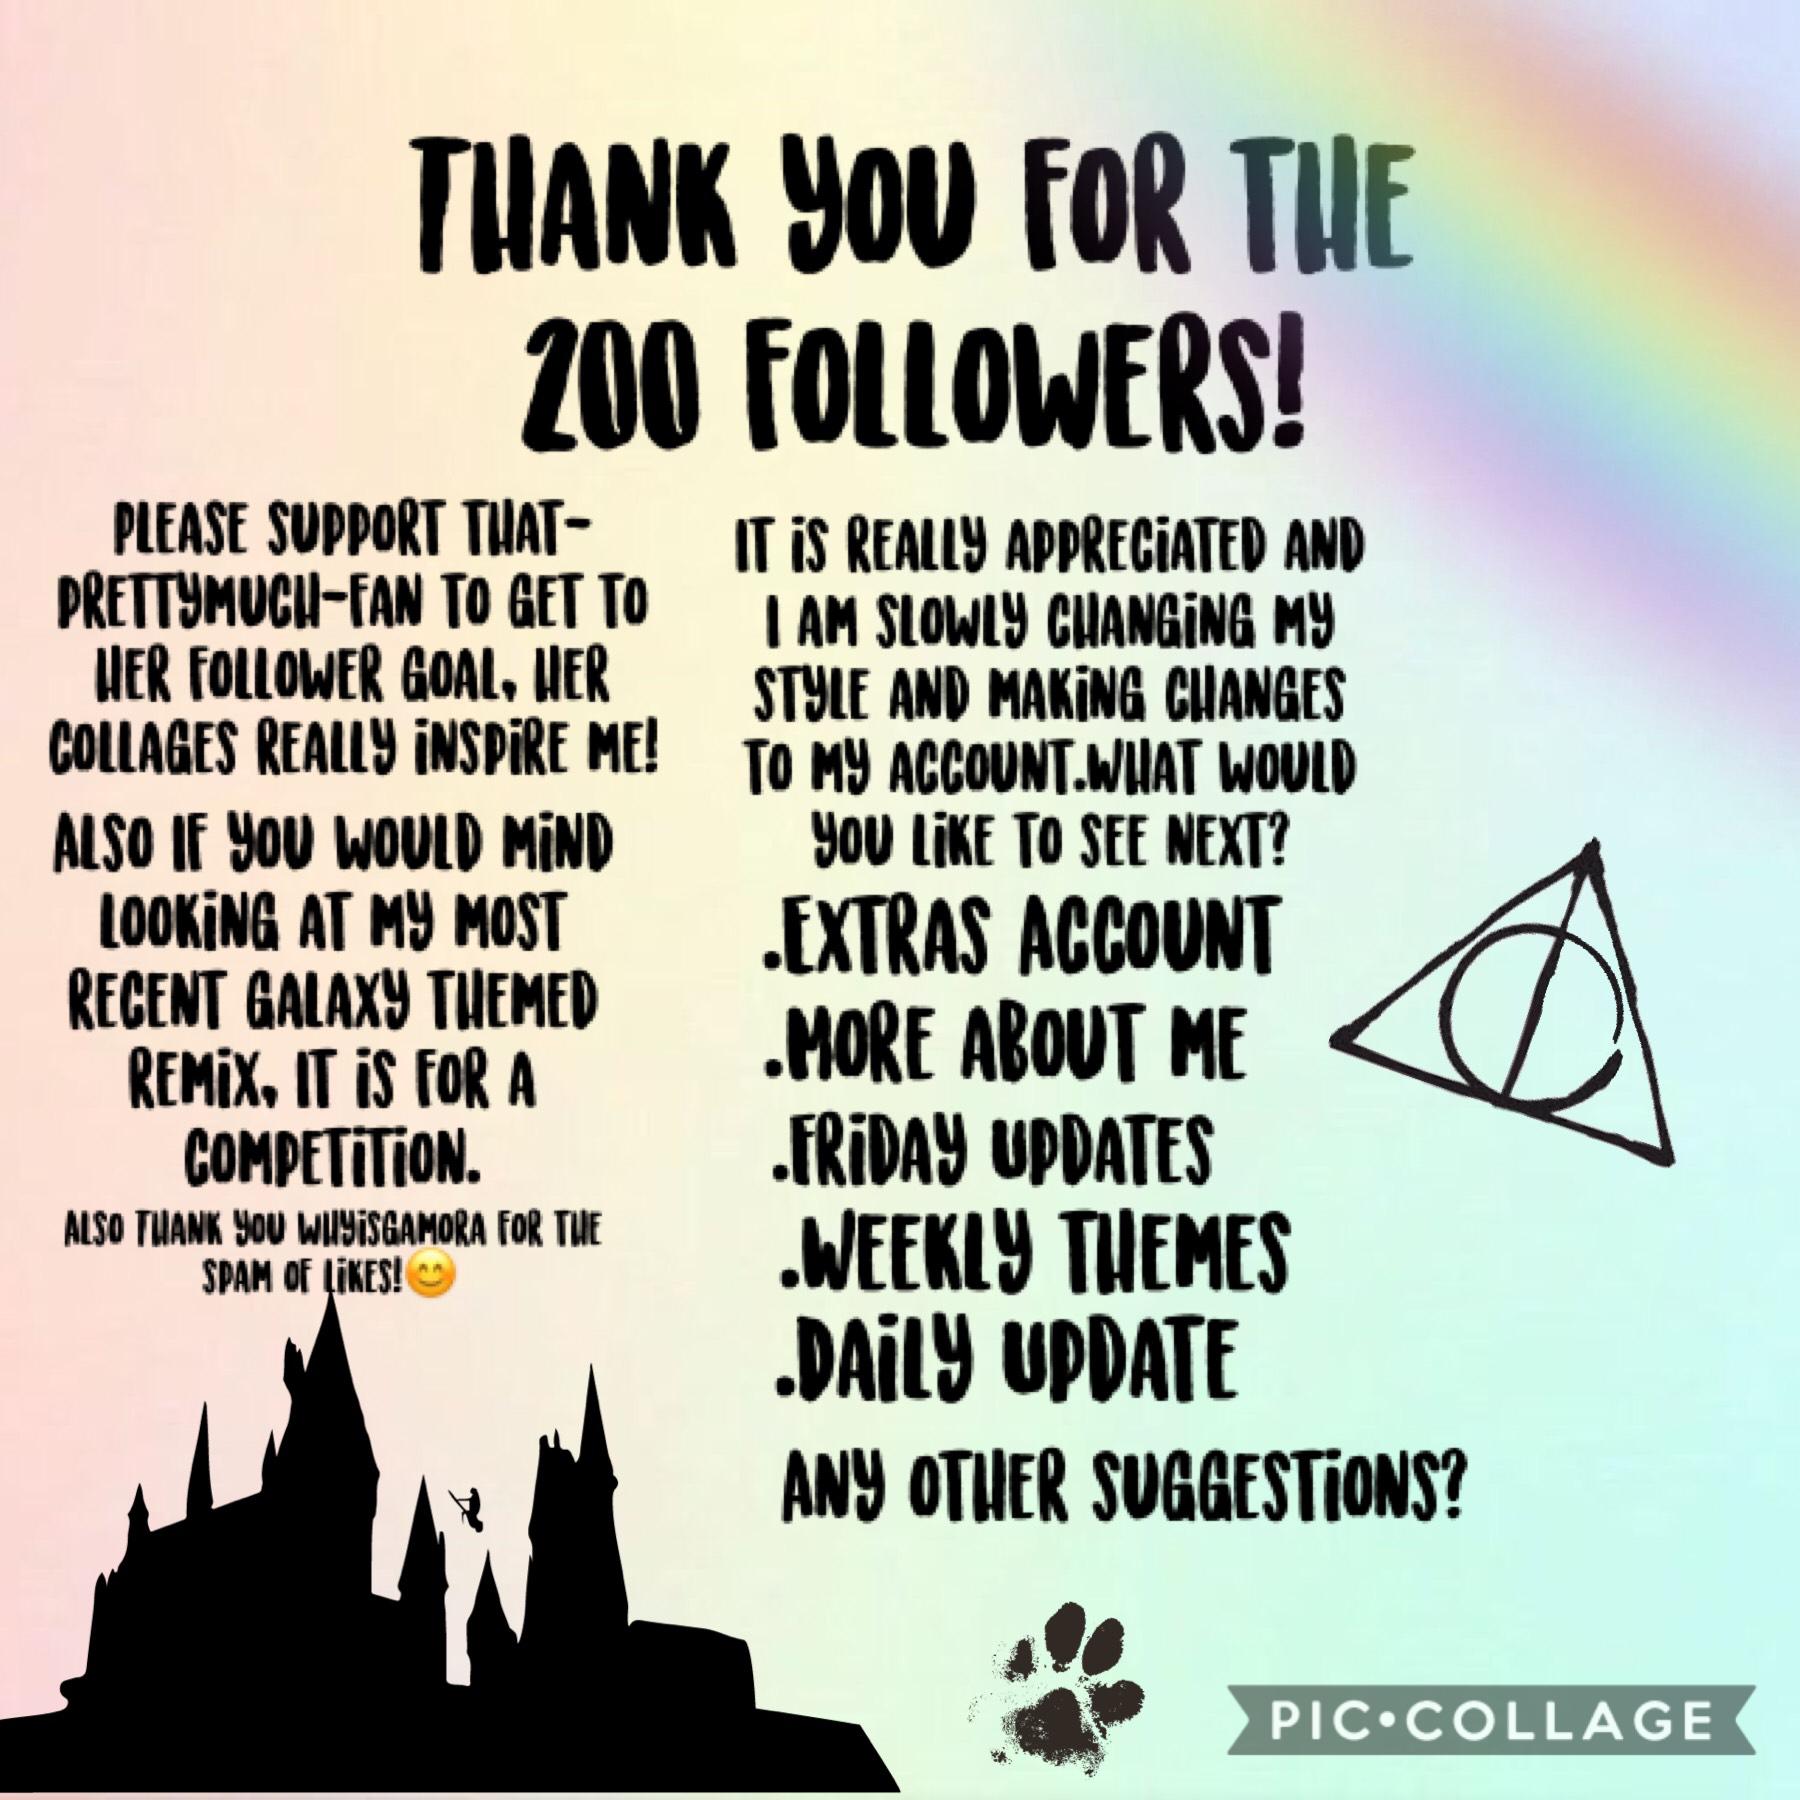 🦄TAP🦄

Thank you all so much!You all have inspired me soo much!